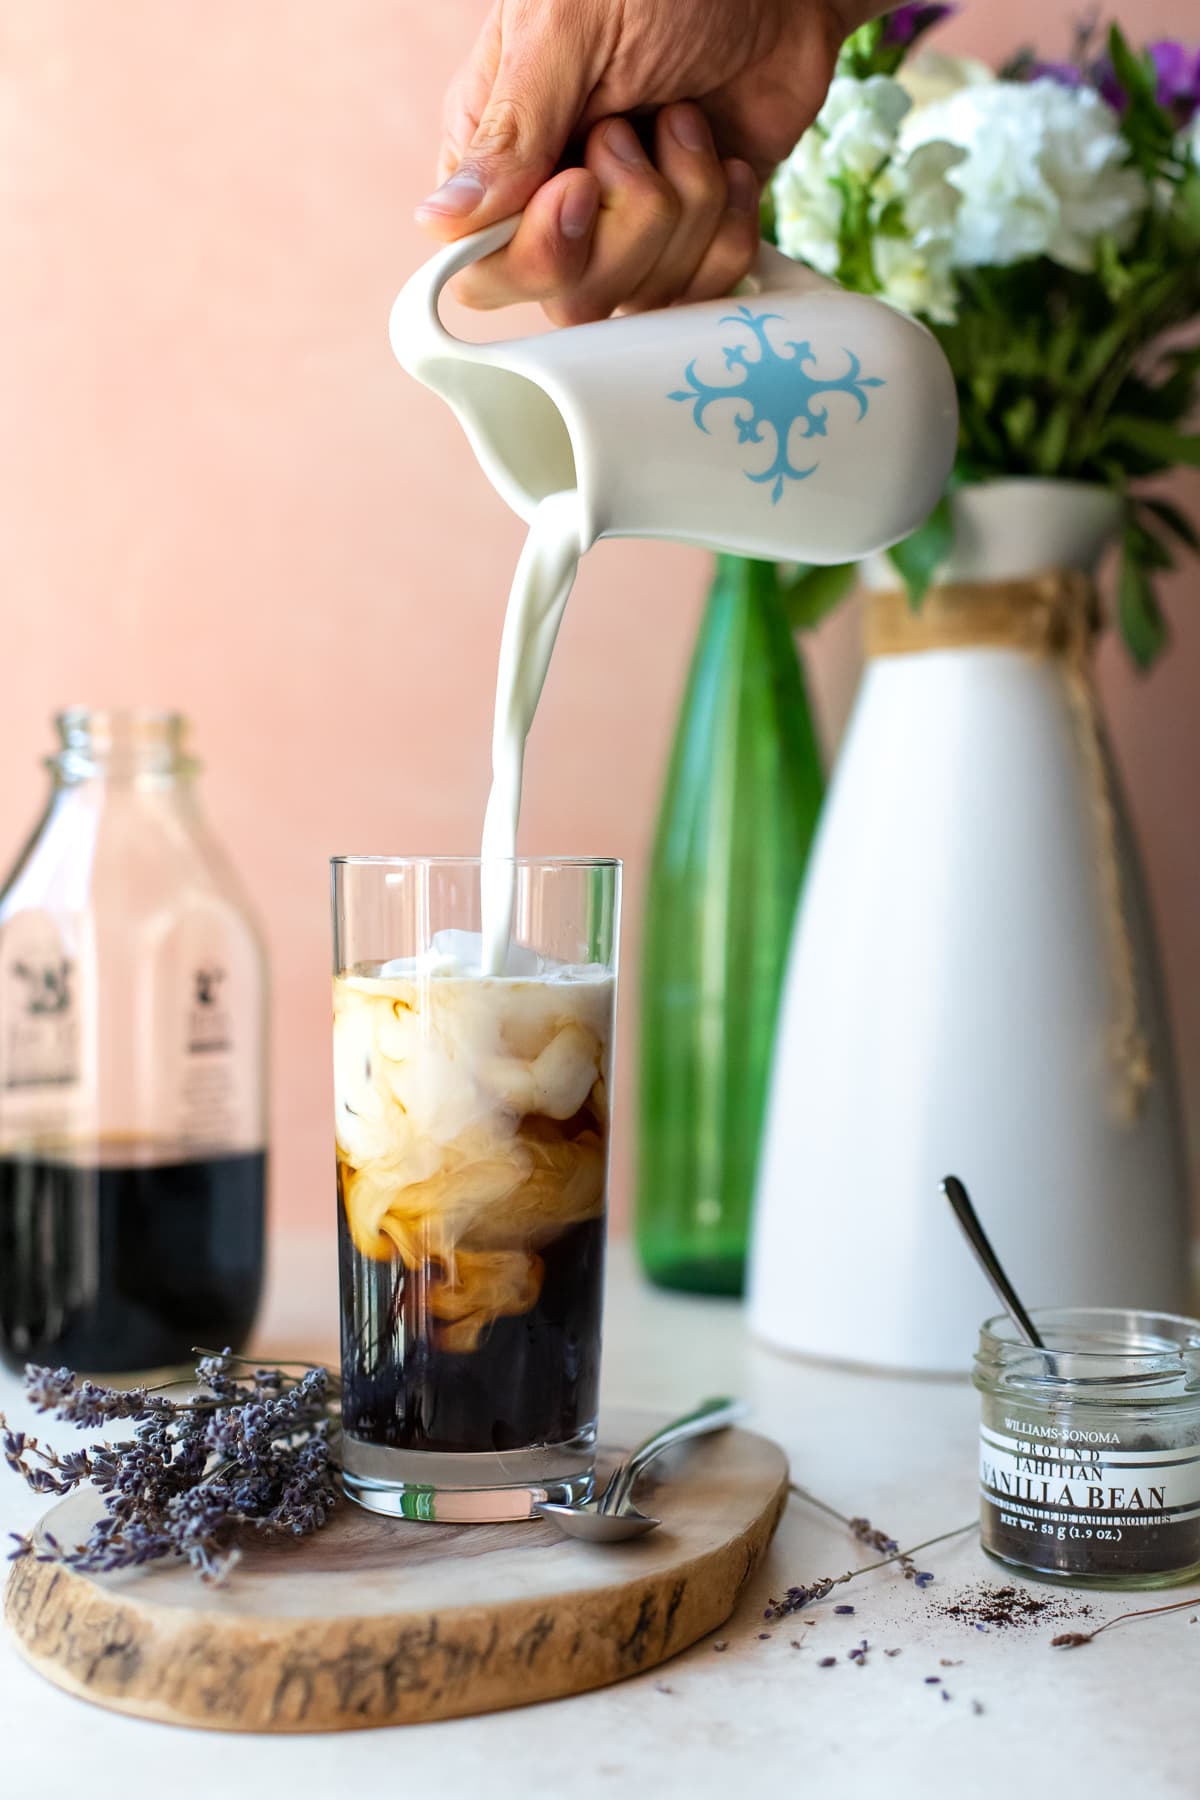 Cream being poured into iced coffee, with fresh flowers in the background against a pink backdrop.